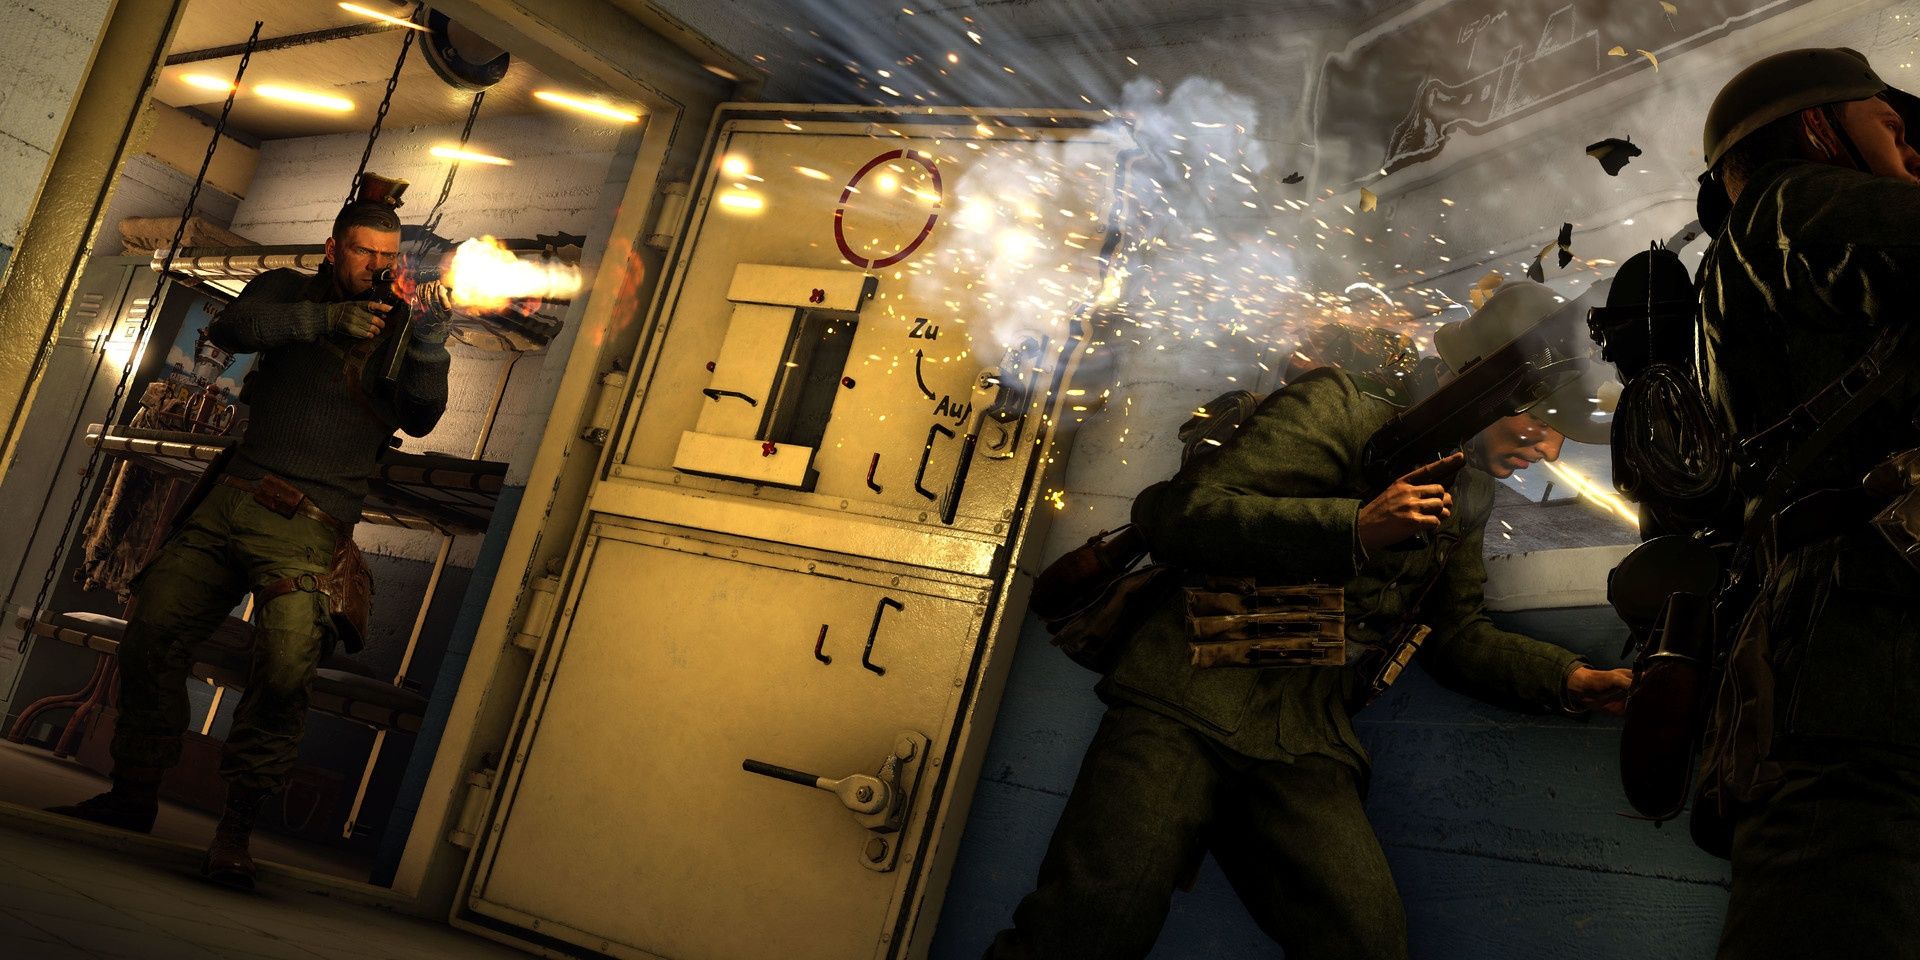 A screenshot showing Karl shooting at some enemy soldiers in Sniper Elite 5